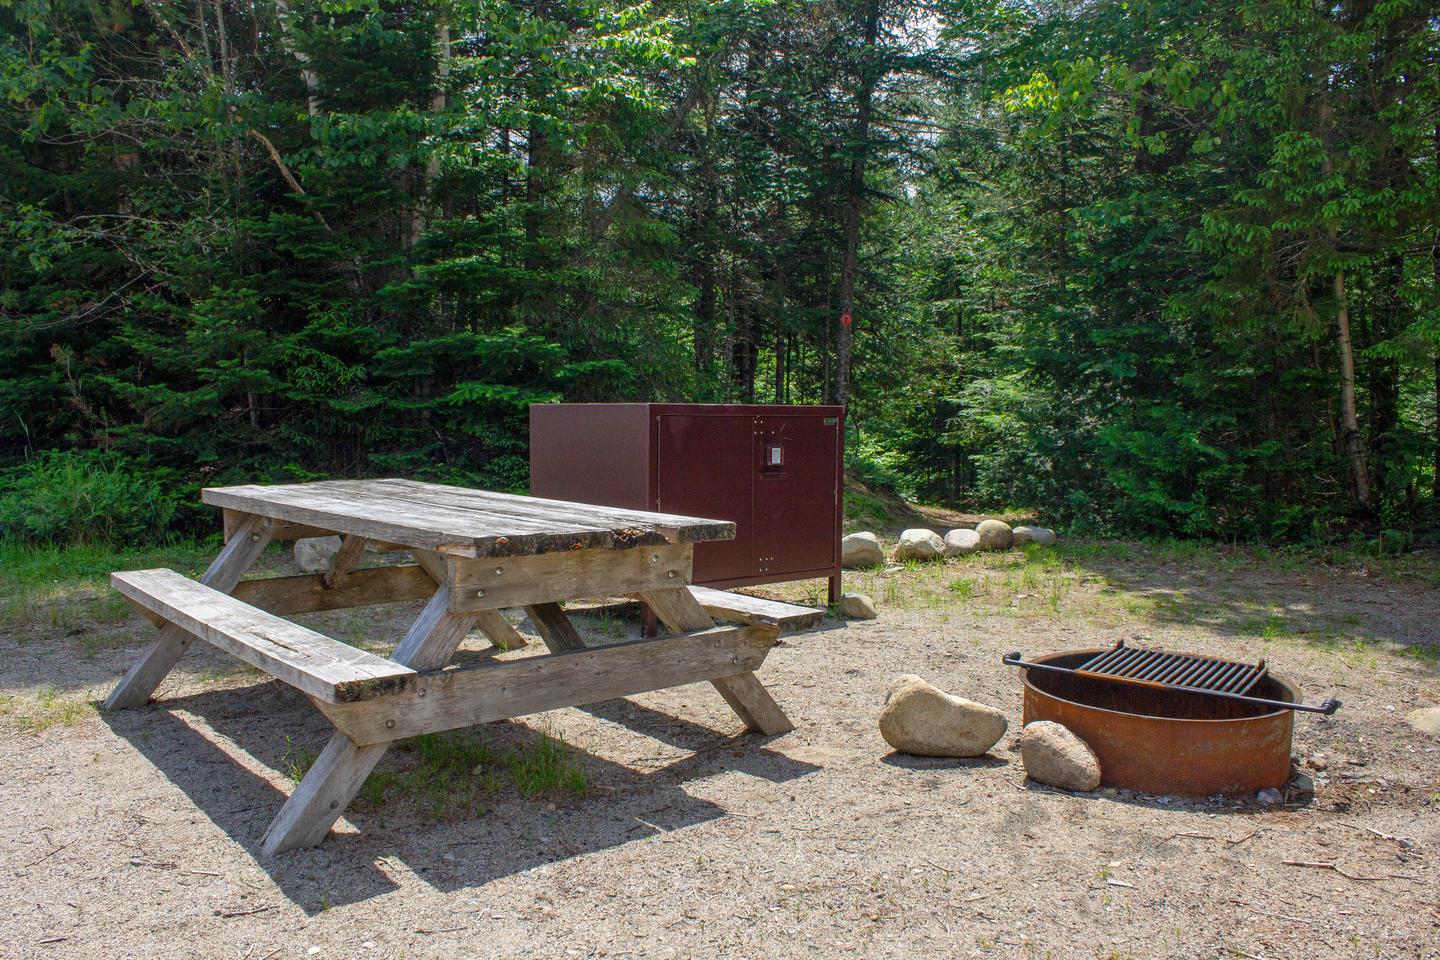 A picture of a campsite with the woods behind it. The ground is composed of gravel and dirt. On the left is a wooden picnic table, behind it is a brown metal food storage box, and to the right is a metal fire ring. It is a sunny day.One out of the two campsites along the forested side of Sandbank Stream Campground.